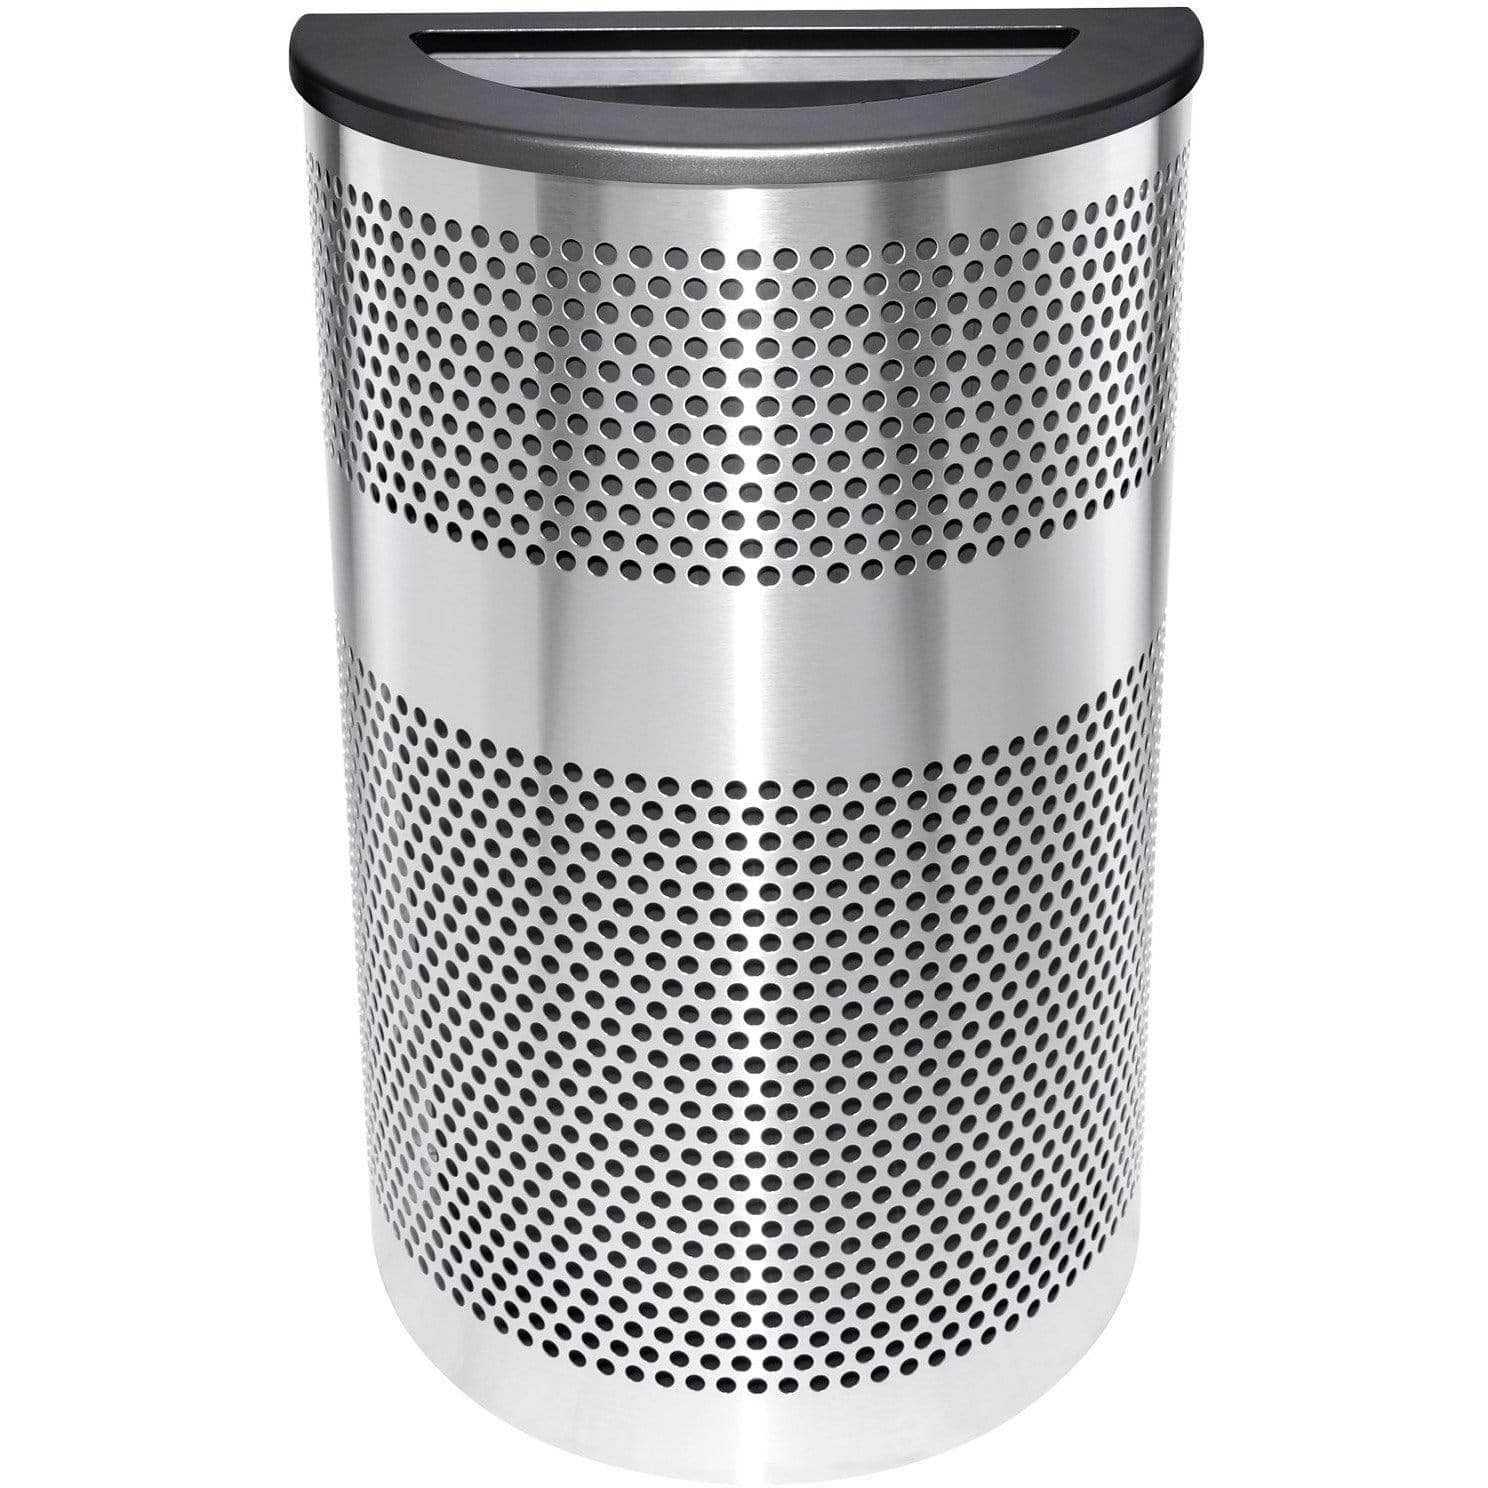 Stainless Steel Trash Can – UHMAX